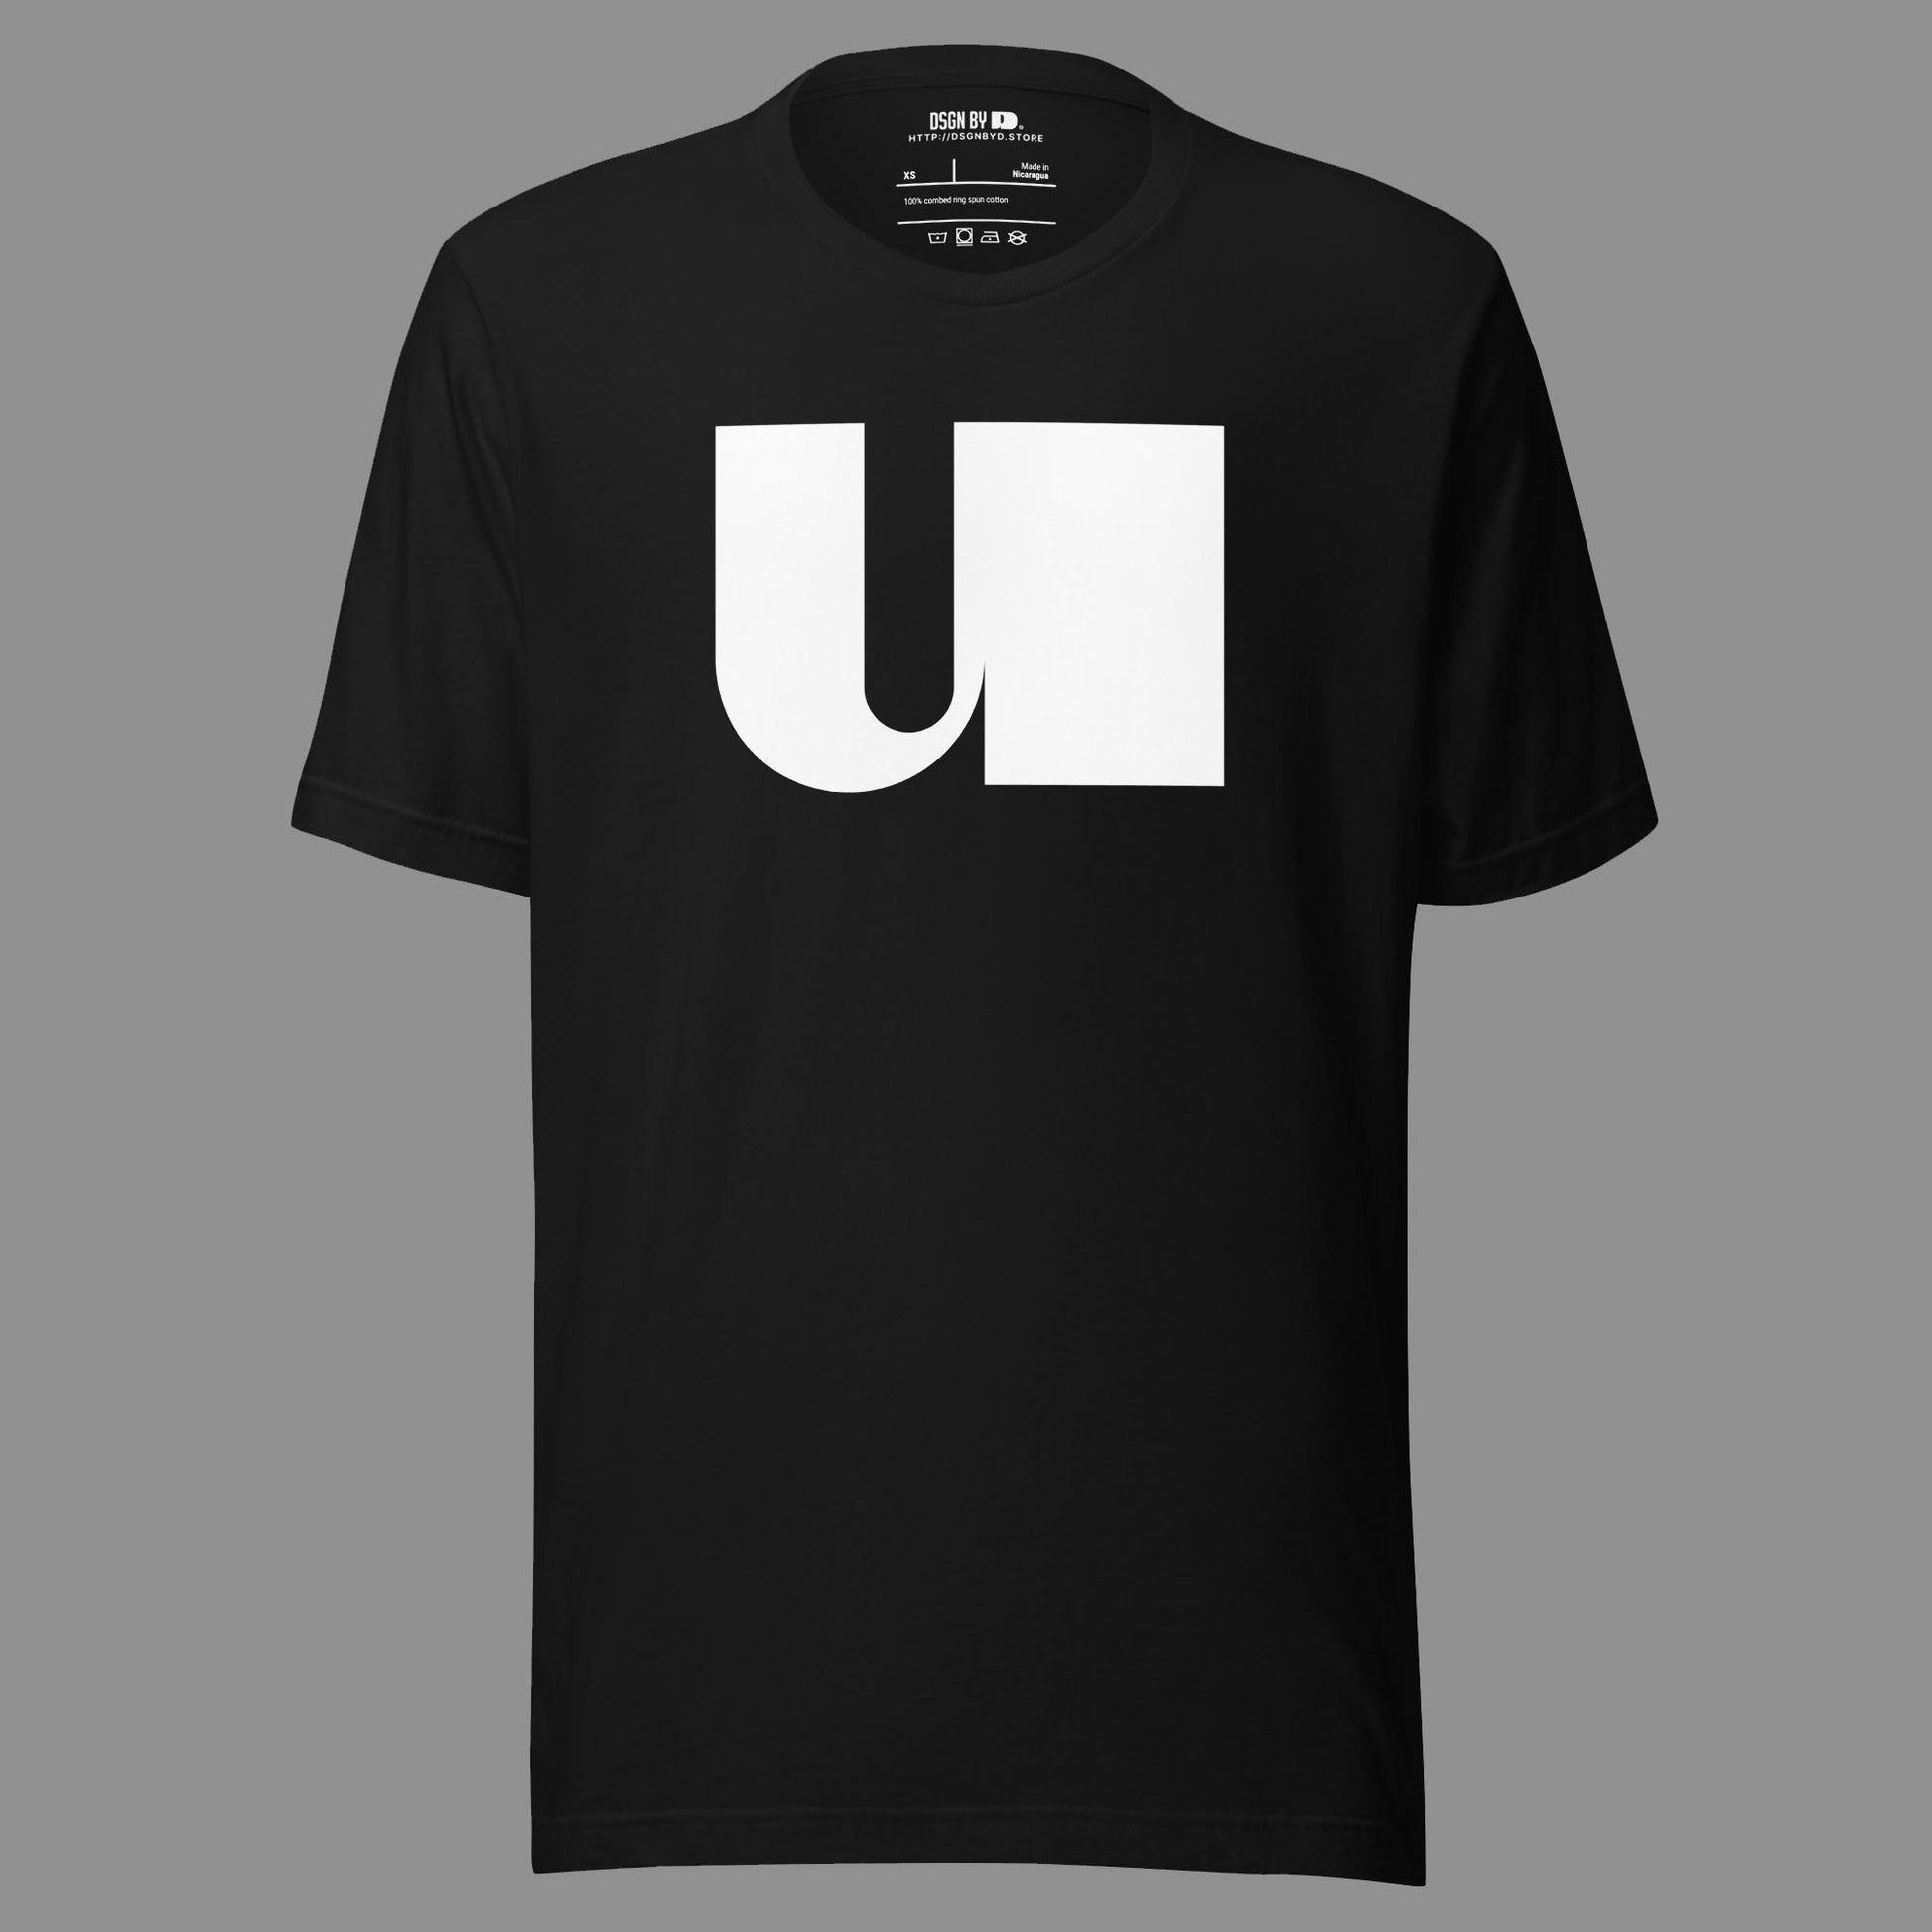 A black cotton unisex graphic tee with letter U.